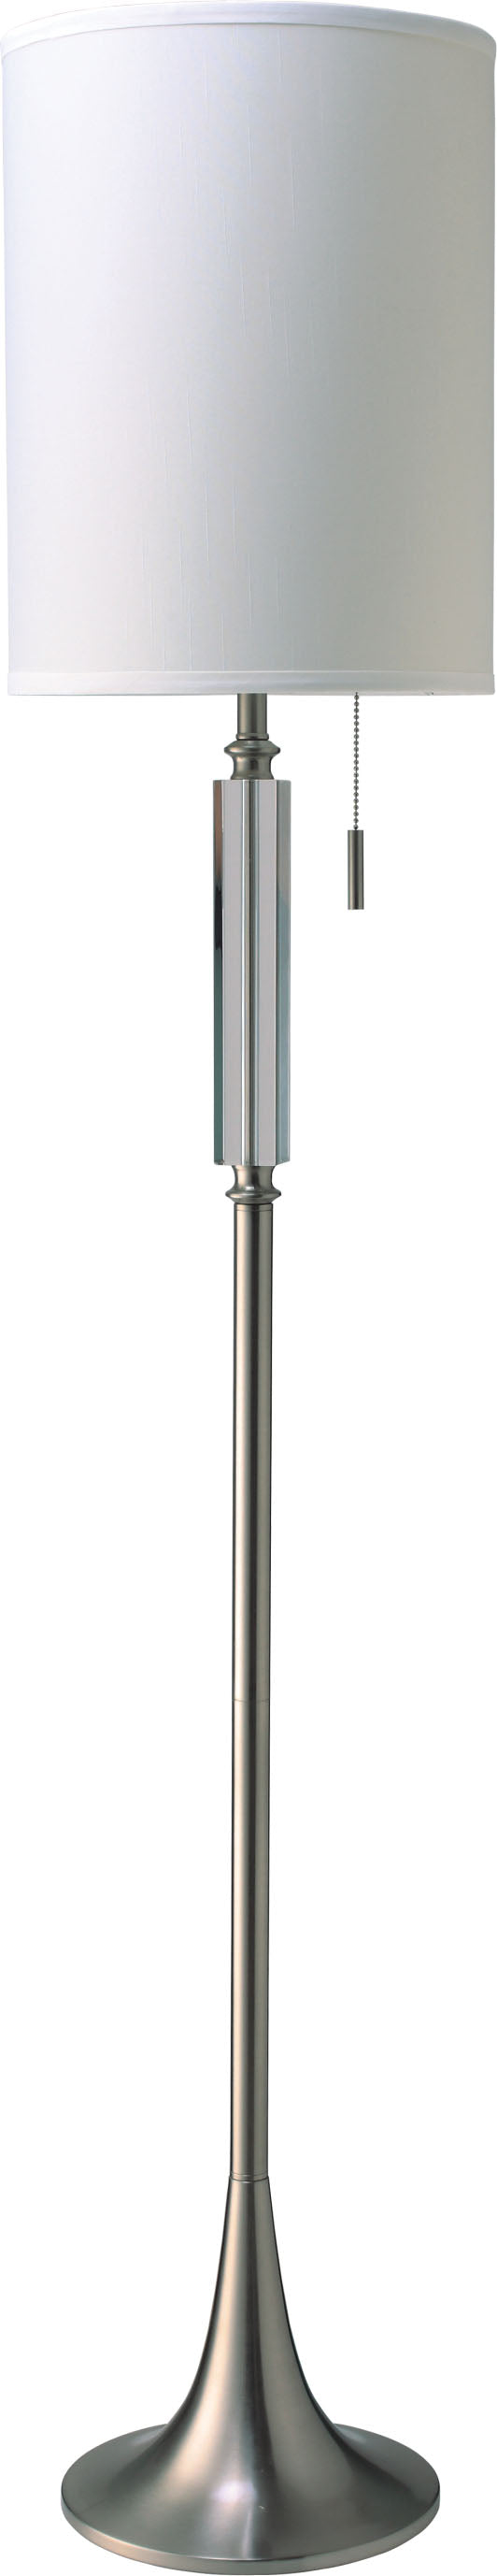 Cody Floor Lamp, Brushed Silver & Crystal